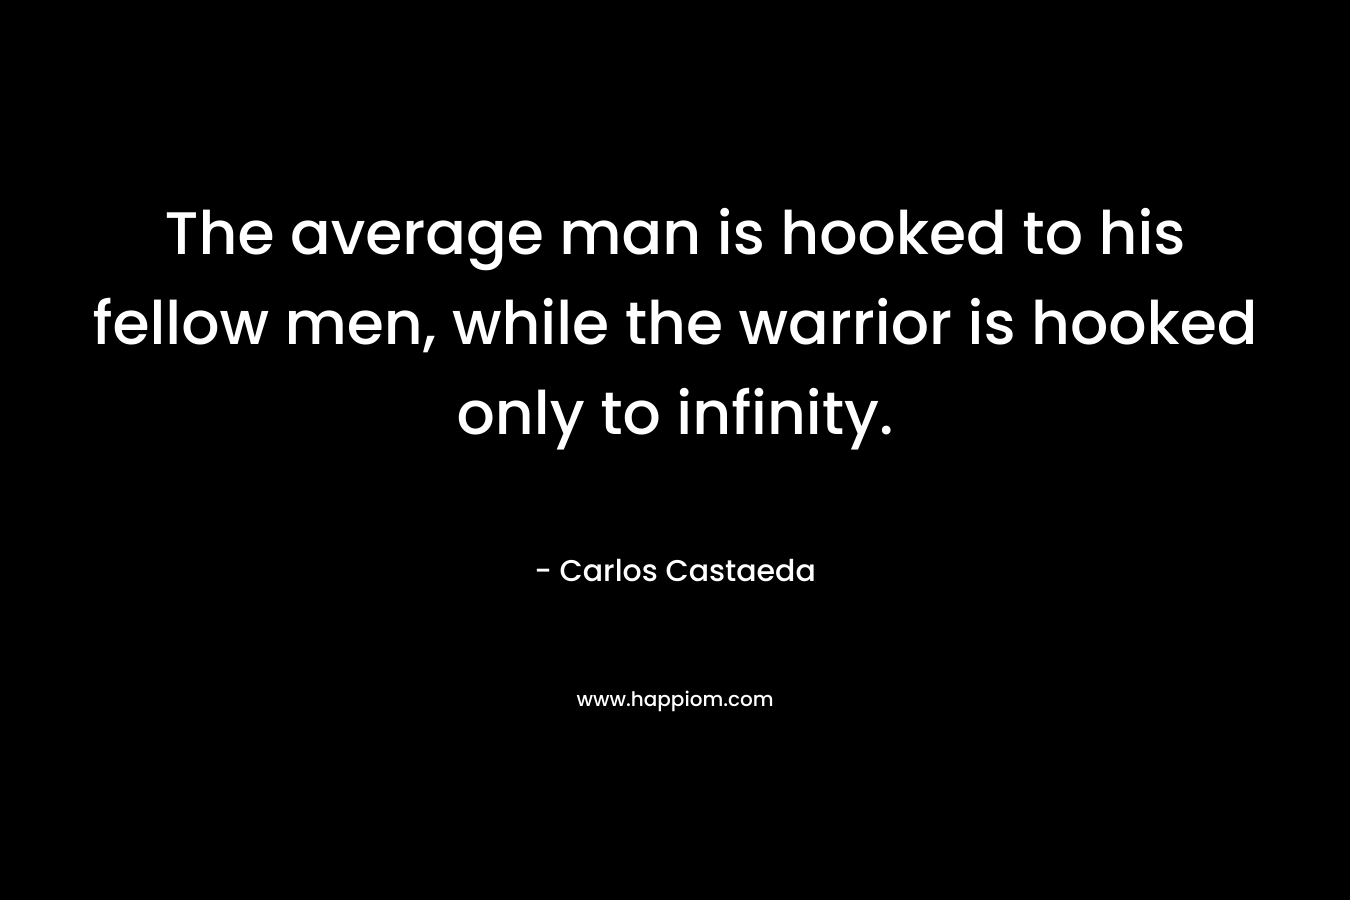 The average man is hooked to his fellow men, while the warrior is hooked only to infinity. – Carlos Castaeda